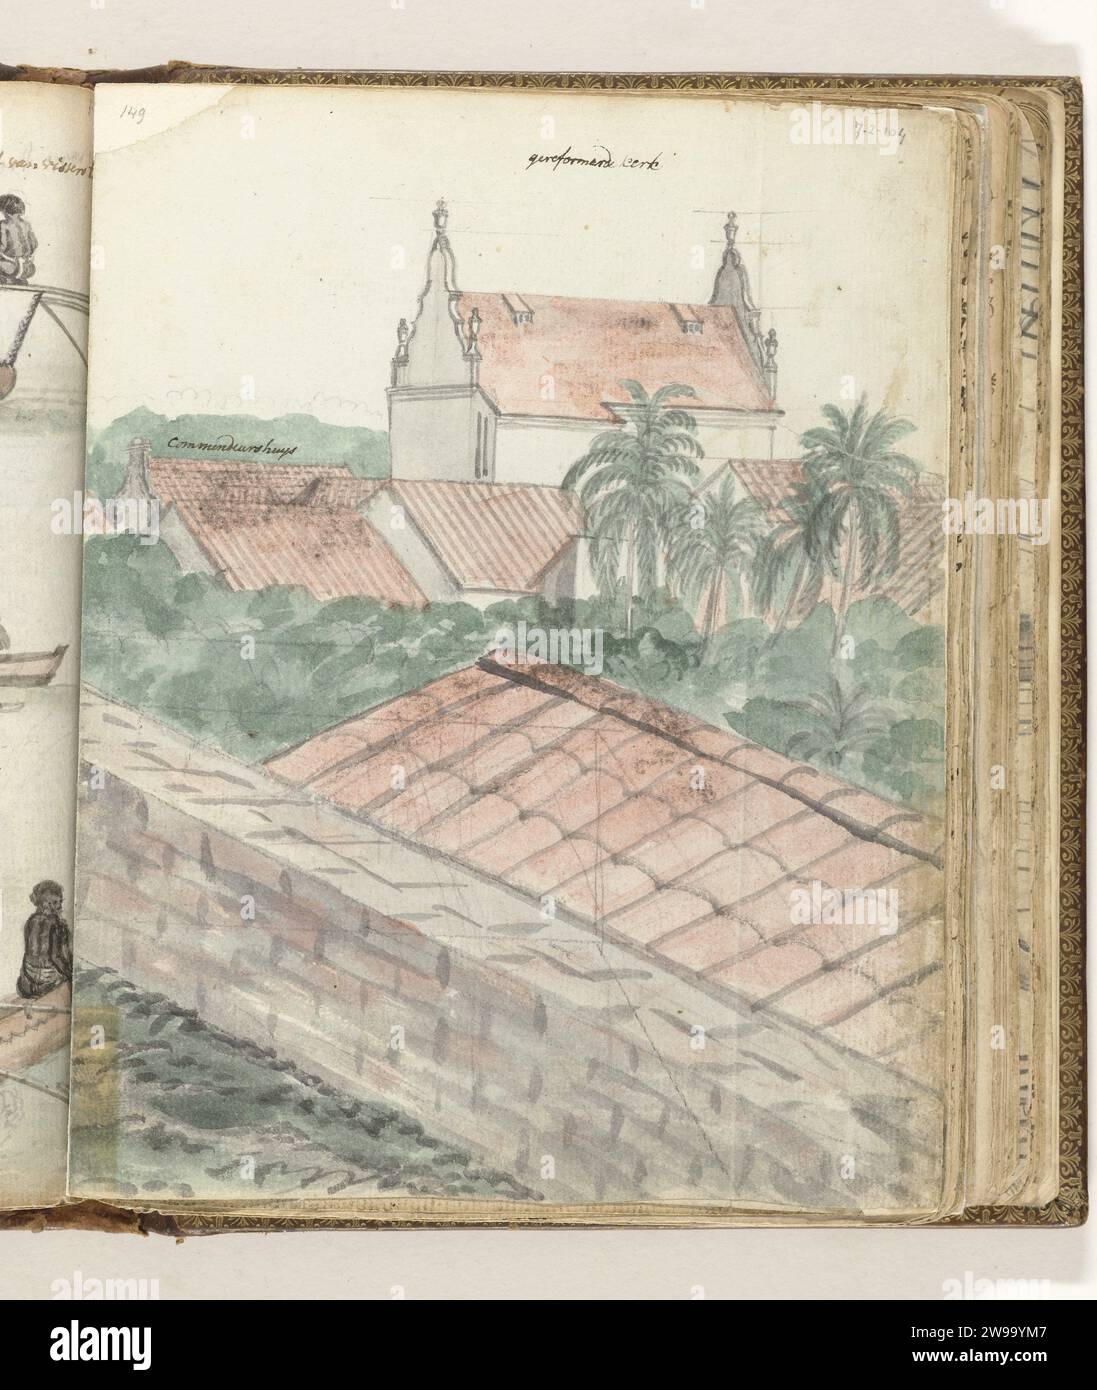 View over Galle, Jan Brandes, 1785 - 1786 drawing Color drawing over three pages of the city of Galle on Ceylon with the Commandeurshuis, the Reformed Church, the Compagnie's Pakhuis and the Adamsberg. With inscription. Part of Jan Brandes' sketchbook, dl. 2 (1808), p. 148-150, 175. (Right of p. 150 belongs in part 2, p. 175.) Galle paper. pencil. watercolor (paint) brush city-view in general; 'veduta' Galle Stock Photo